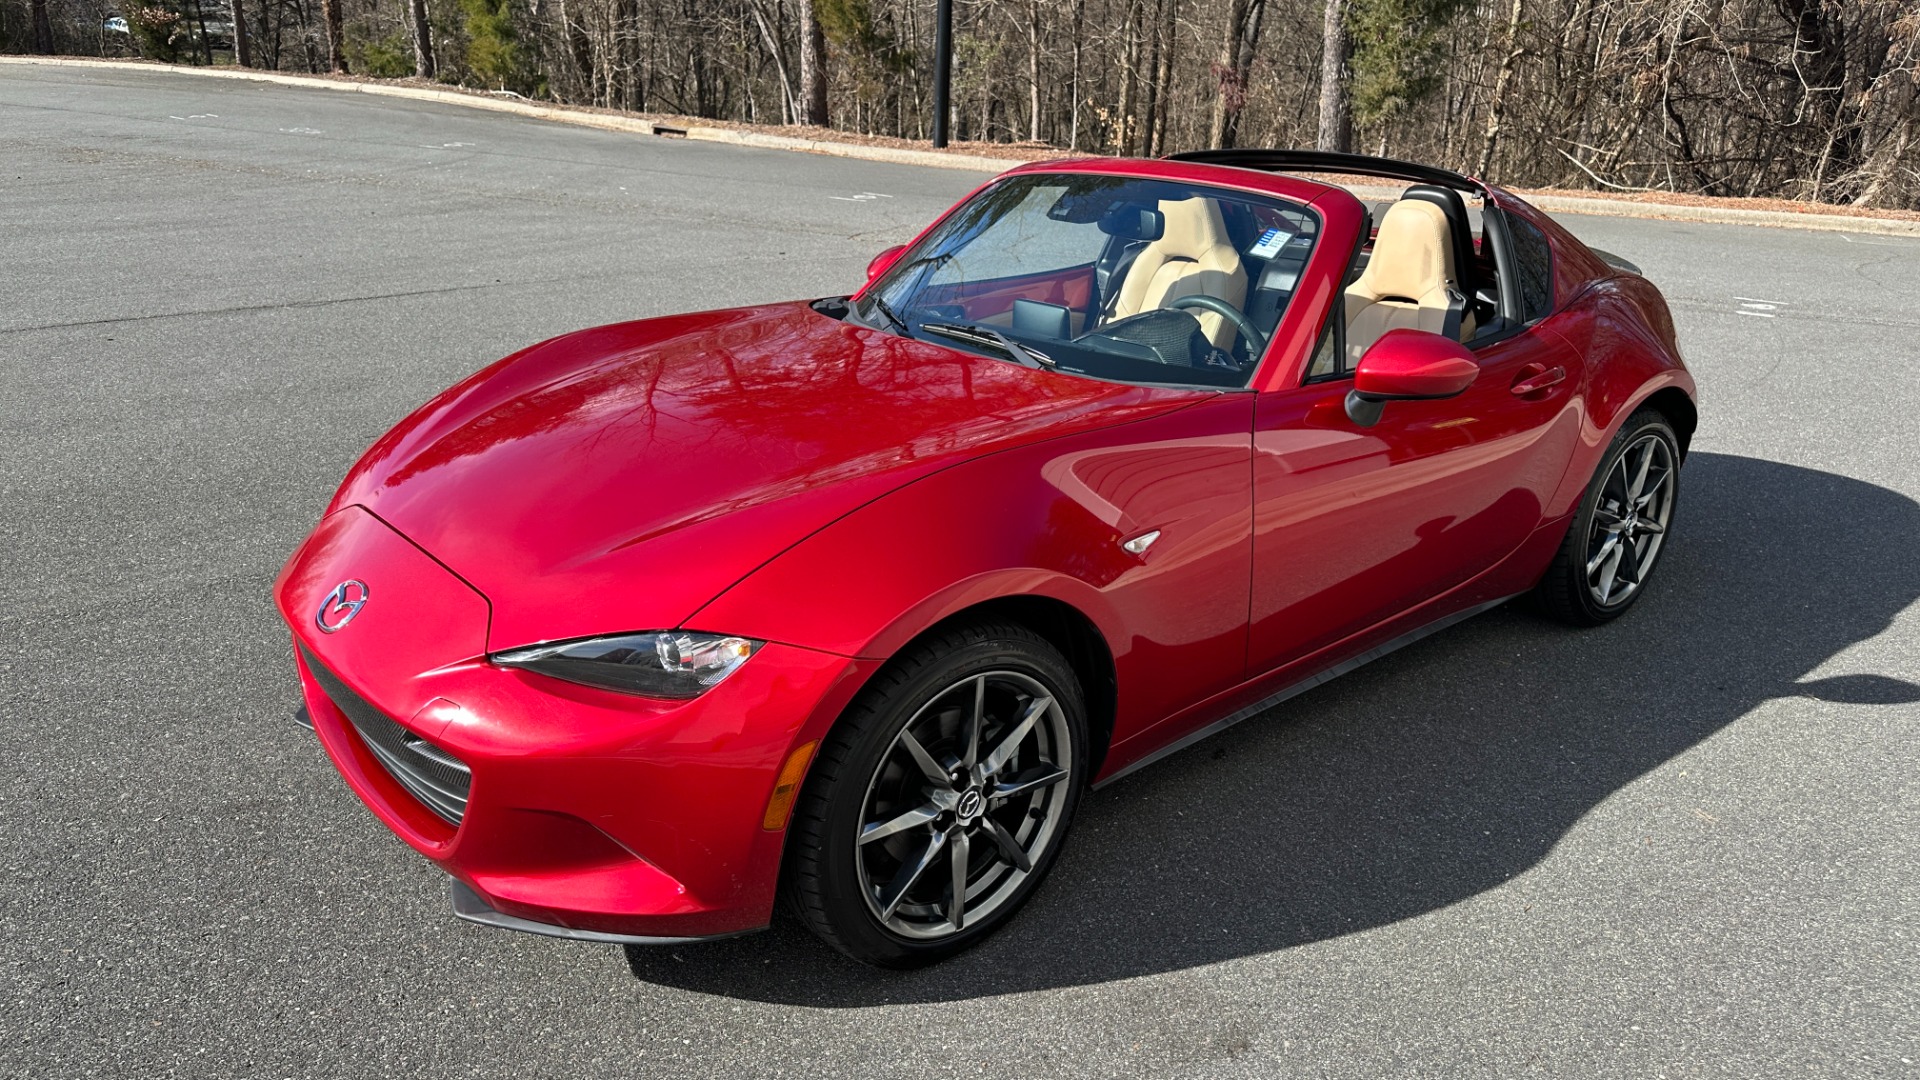 Used 2017 Mazda MX-5 Miata RF GRAND TOURING / POWER HARD TOP CONVERTIBLE / AUTOMATIC for sale $22,995 at Formula Imports in Charlotte NC 28227 5